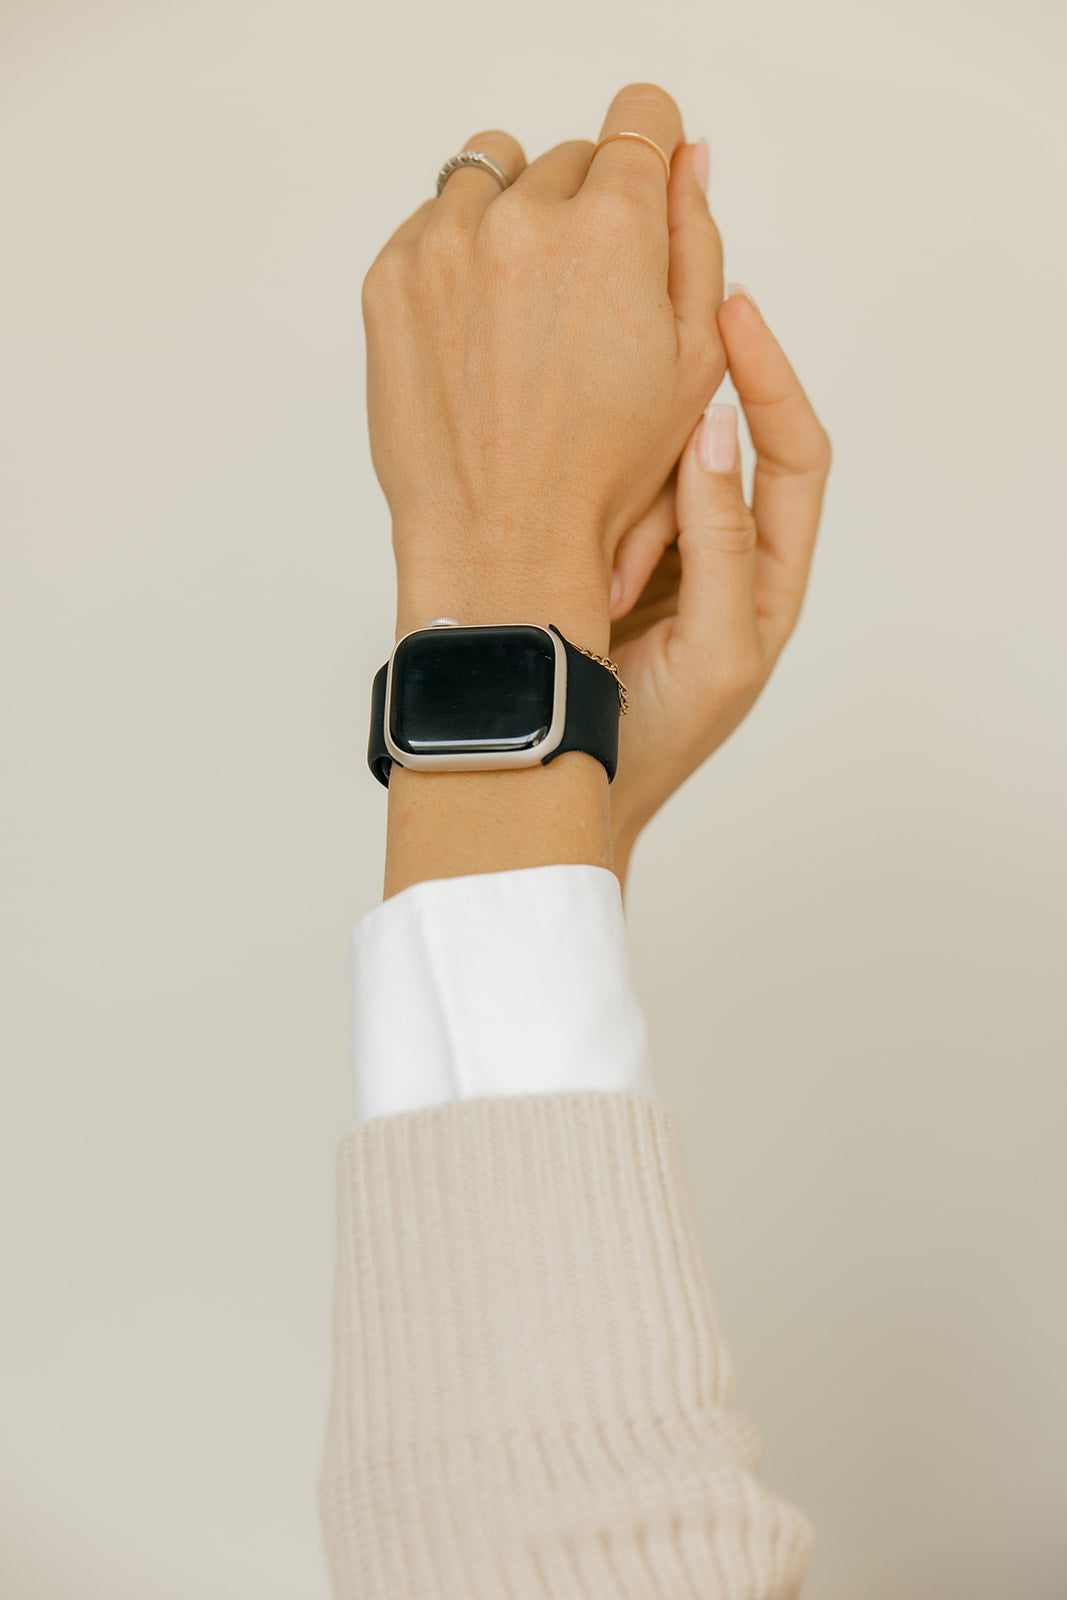 Lights Out Apple Watch Band